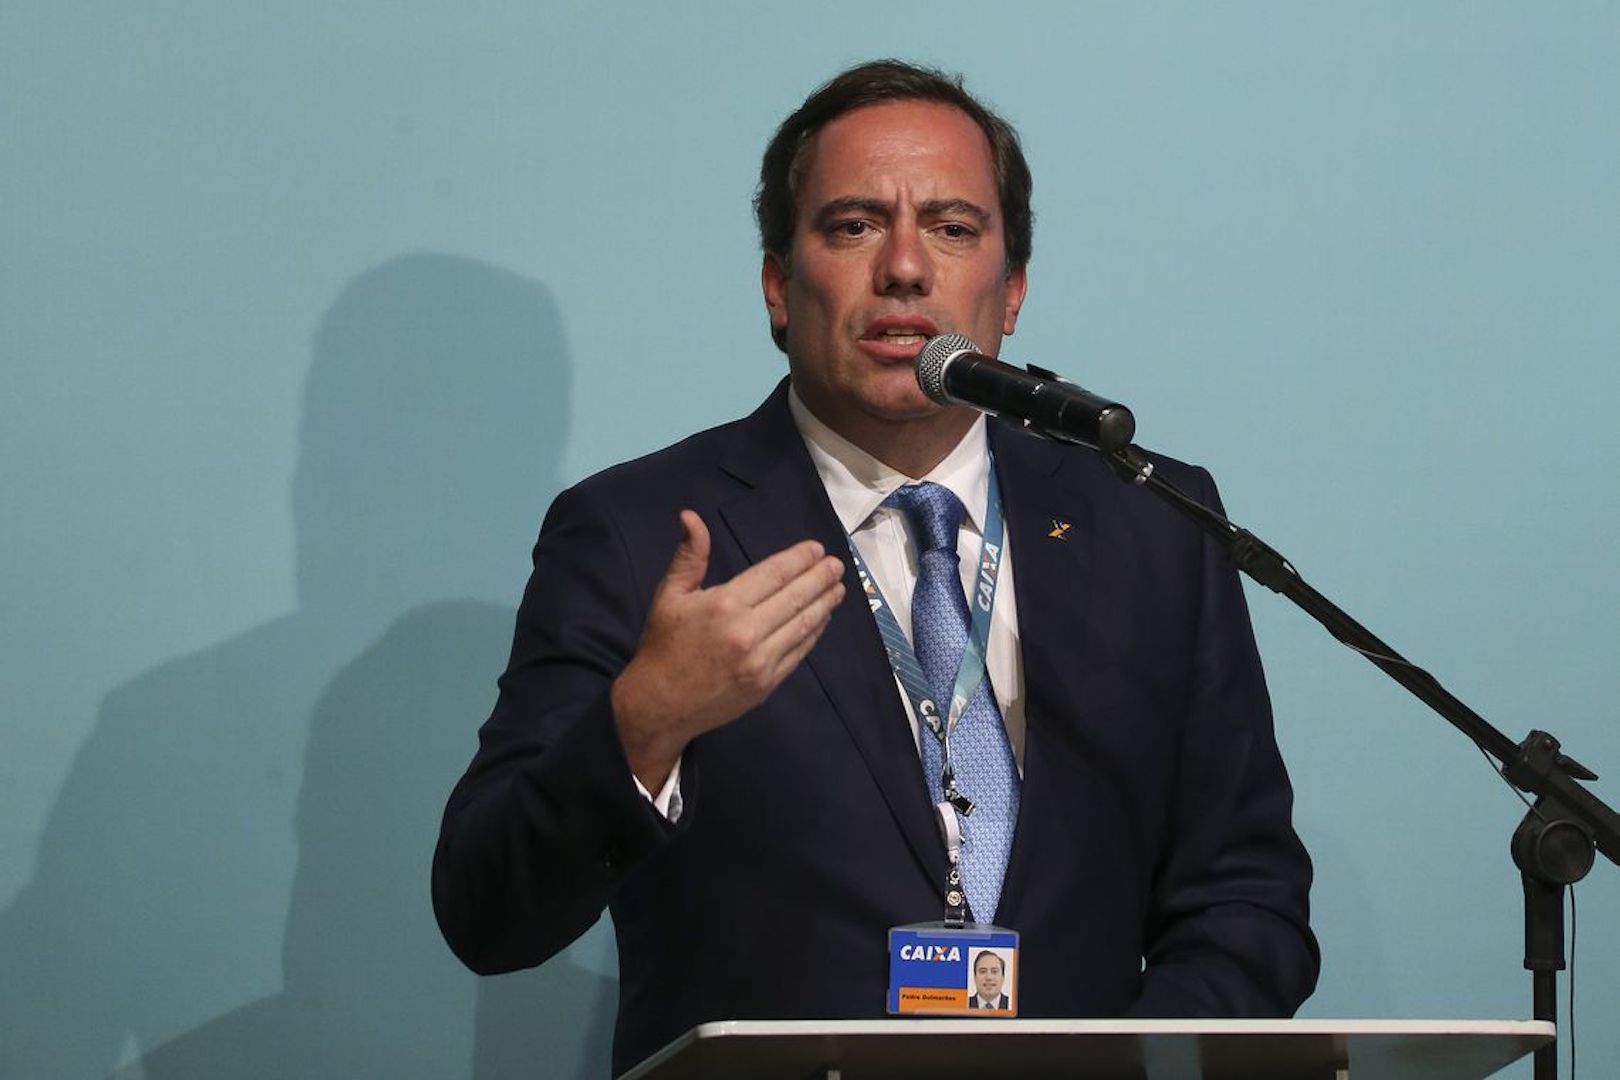 Brazil,President of Caixa Economica Federal, Pedro Guimarães, is said to have boycotted funds to the Northeast.